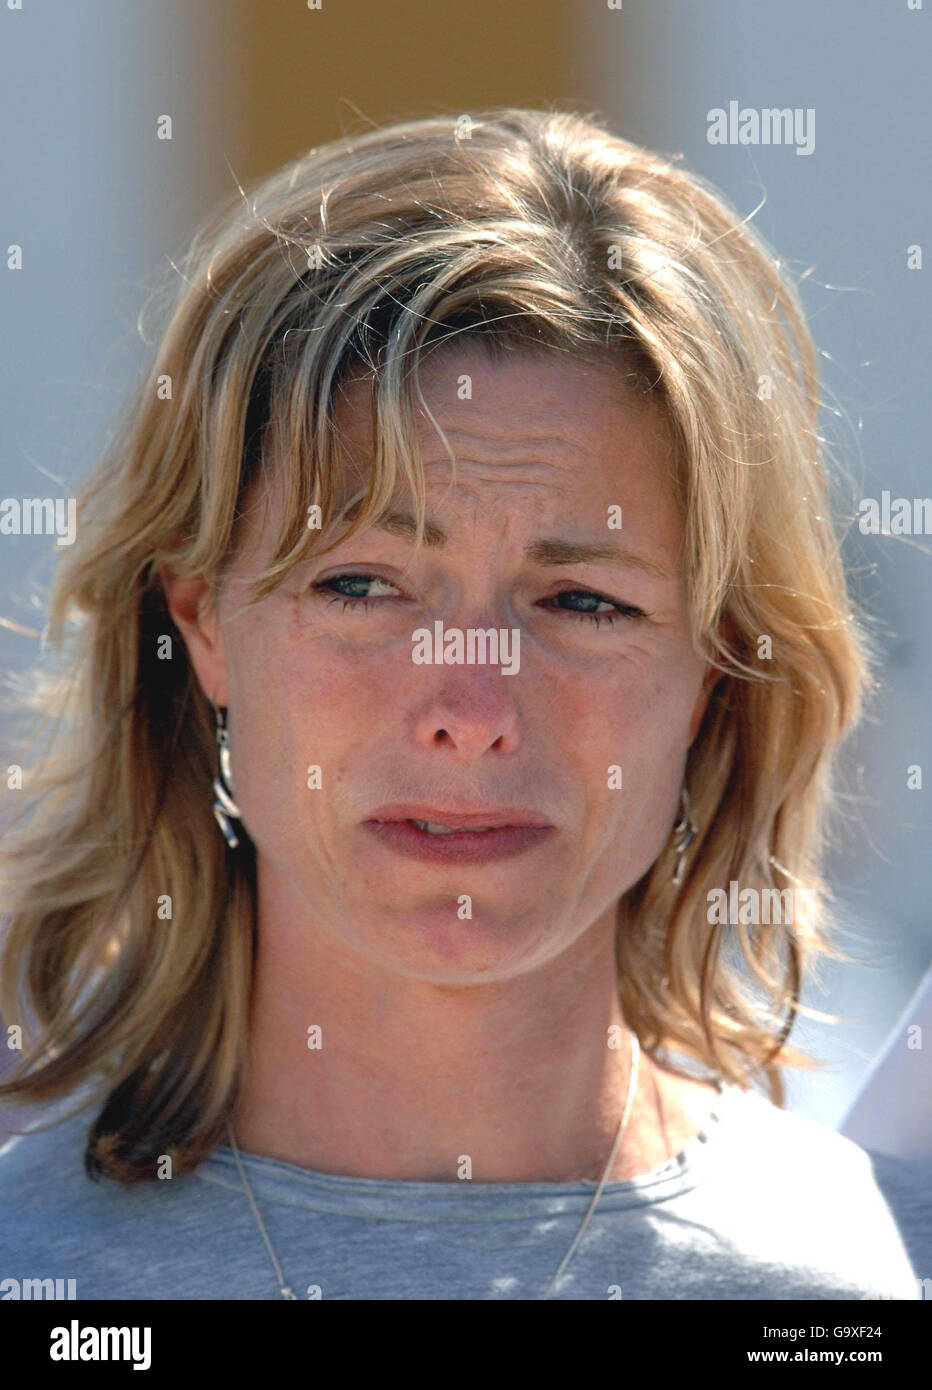 Kate McCann, the mother of three-year-old Madeleine McCann, speaks to the media after attending a church service in Praia da Luz, in the Algave, Portugal. Stock Photo